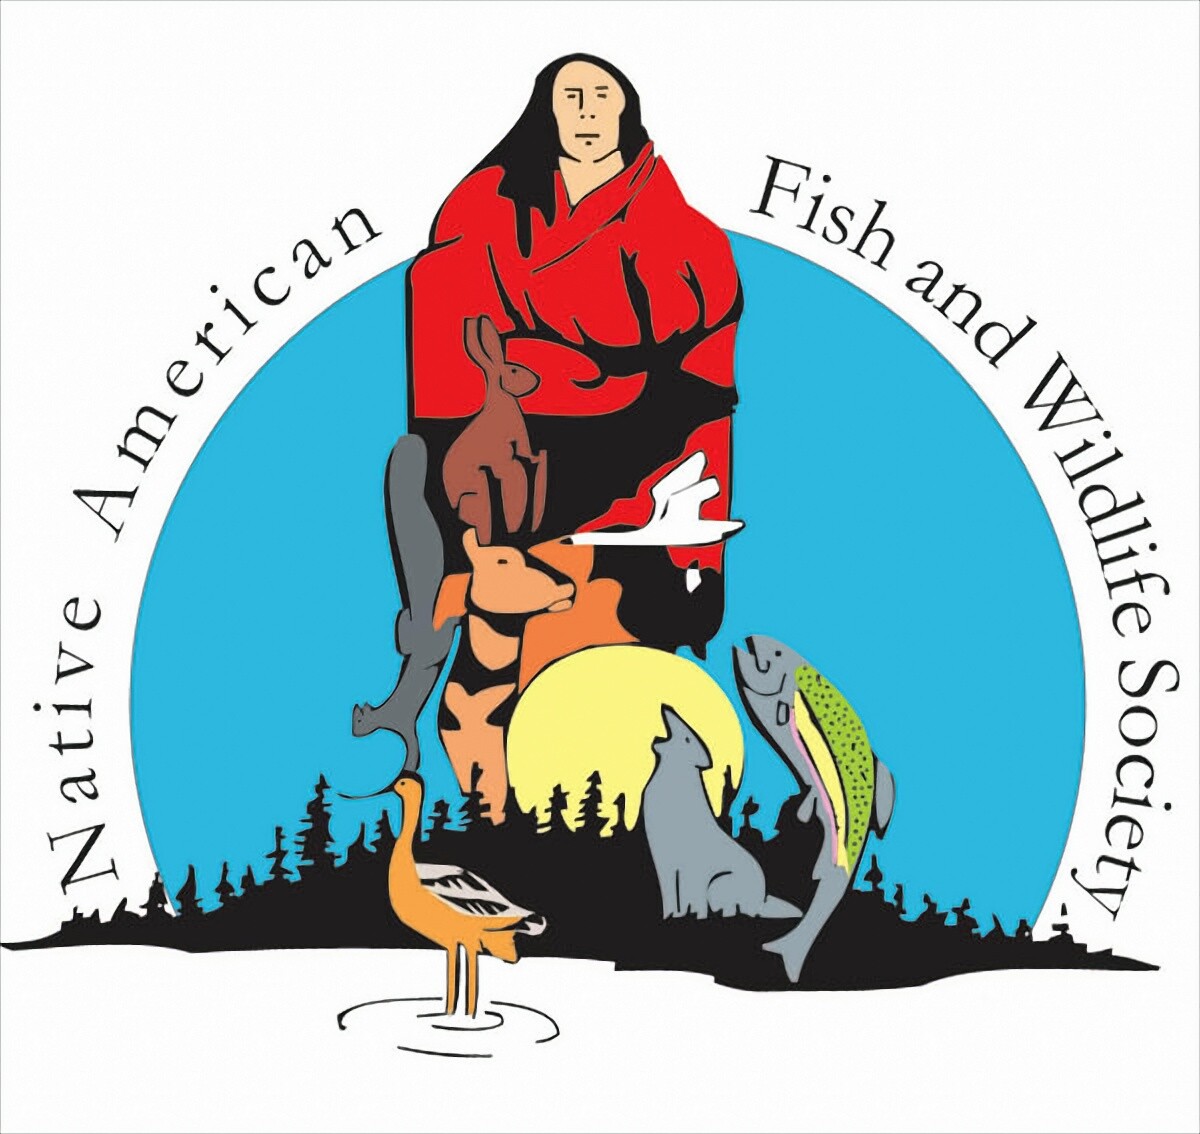 Tribal Fisheries Management Conference Session